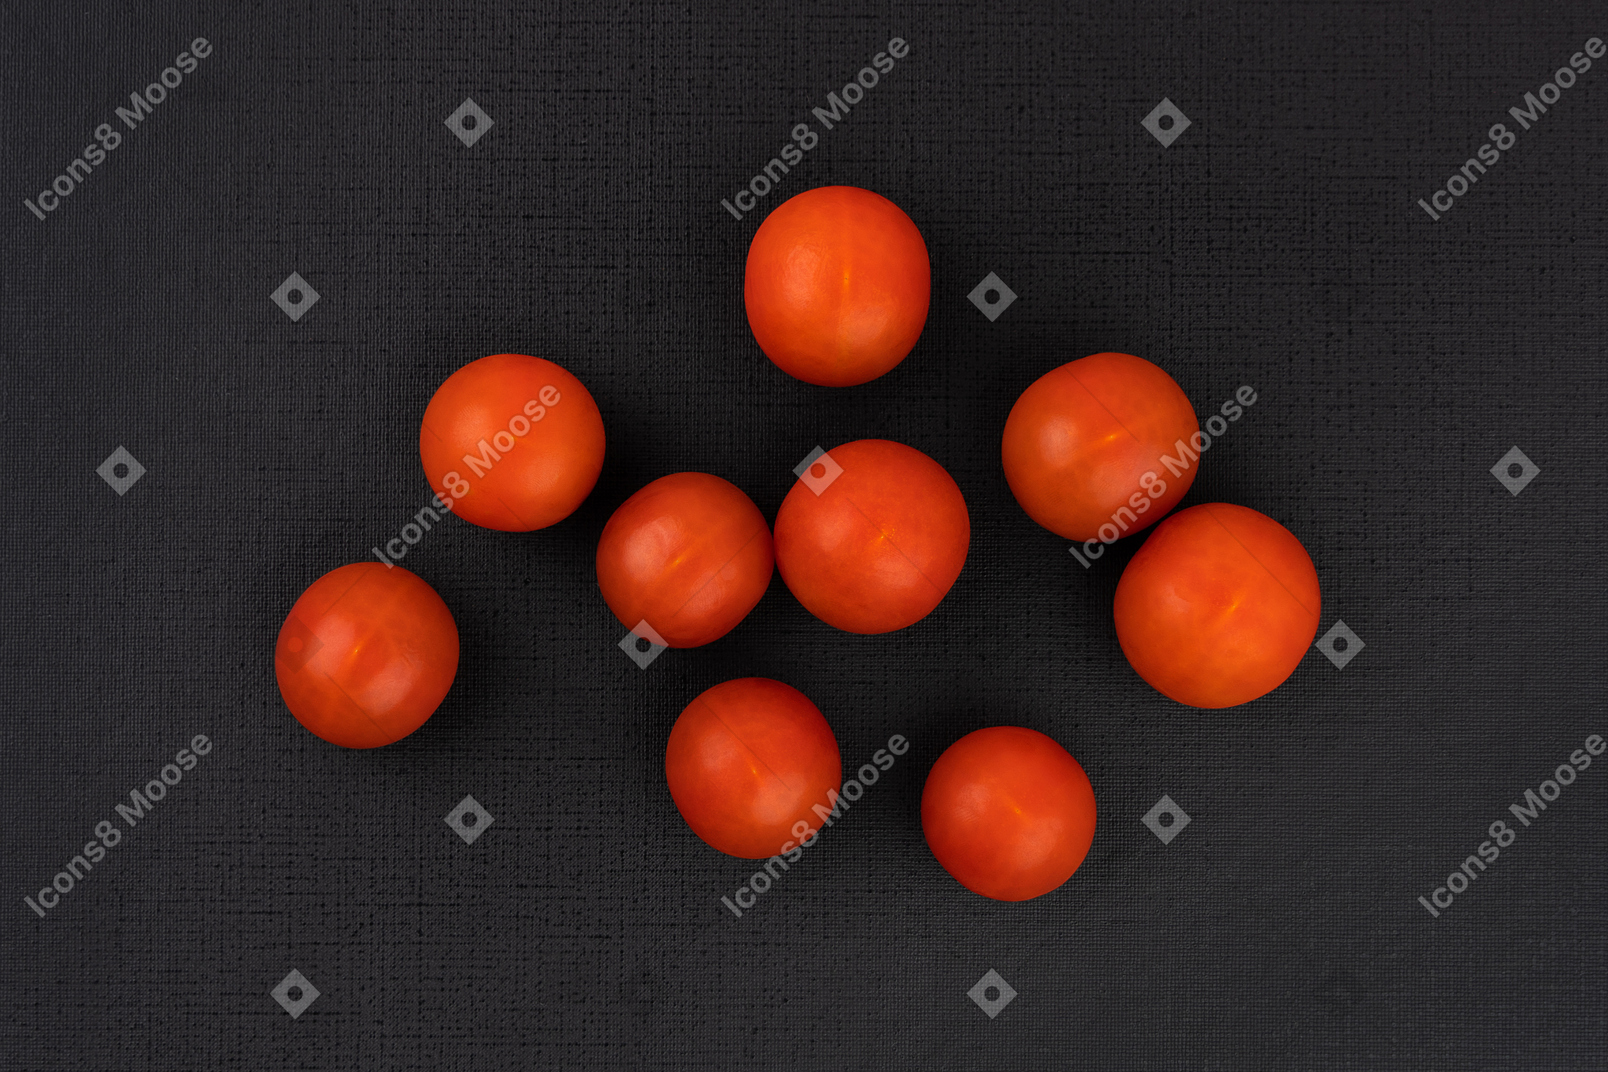 Tomatoes in the dark